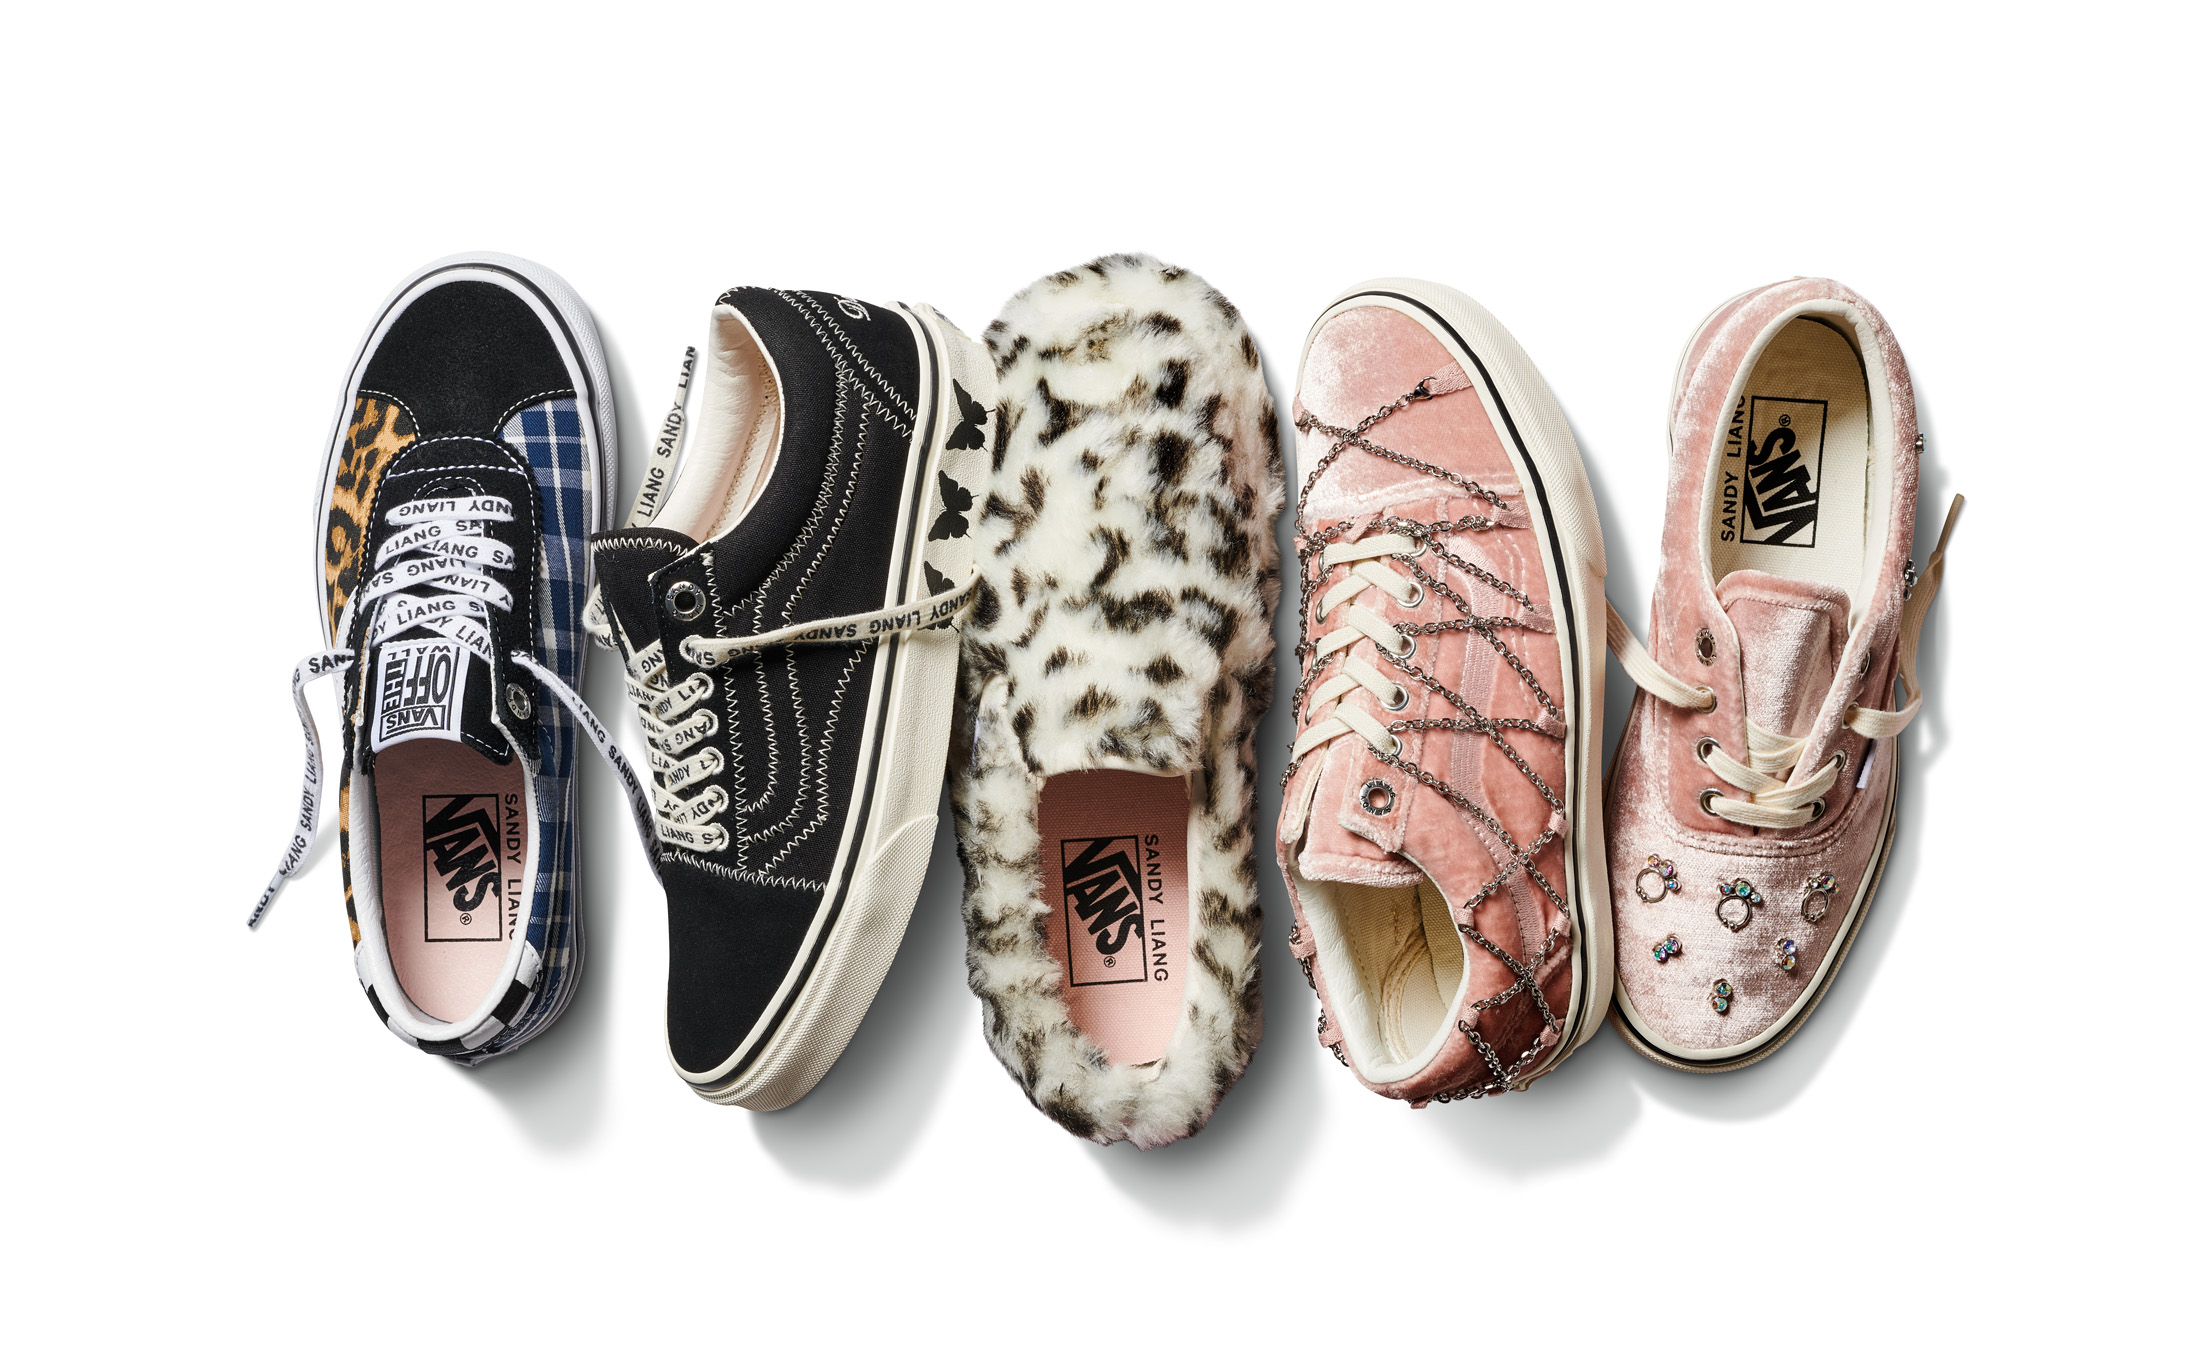 Vans x Sandy Liang – Collection (2.21.20) - Under The Palms